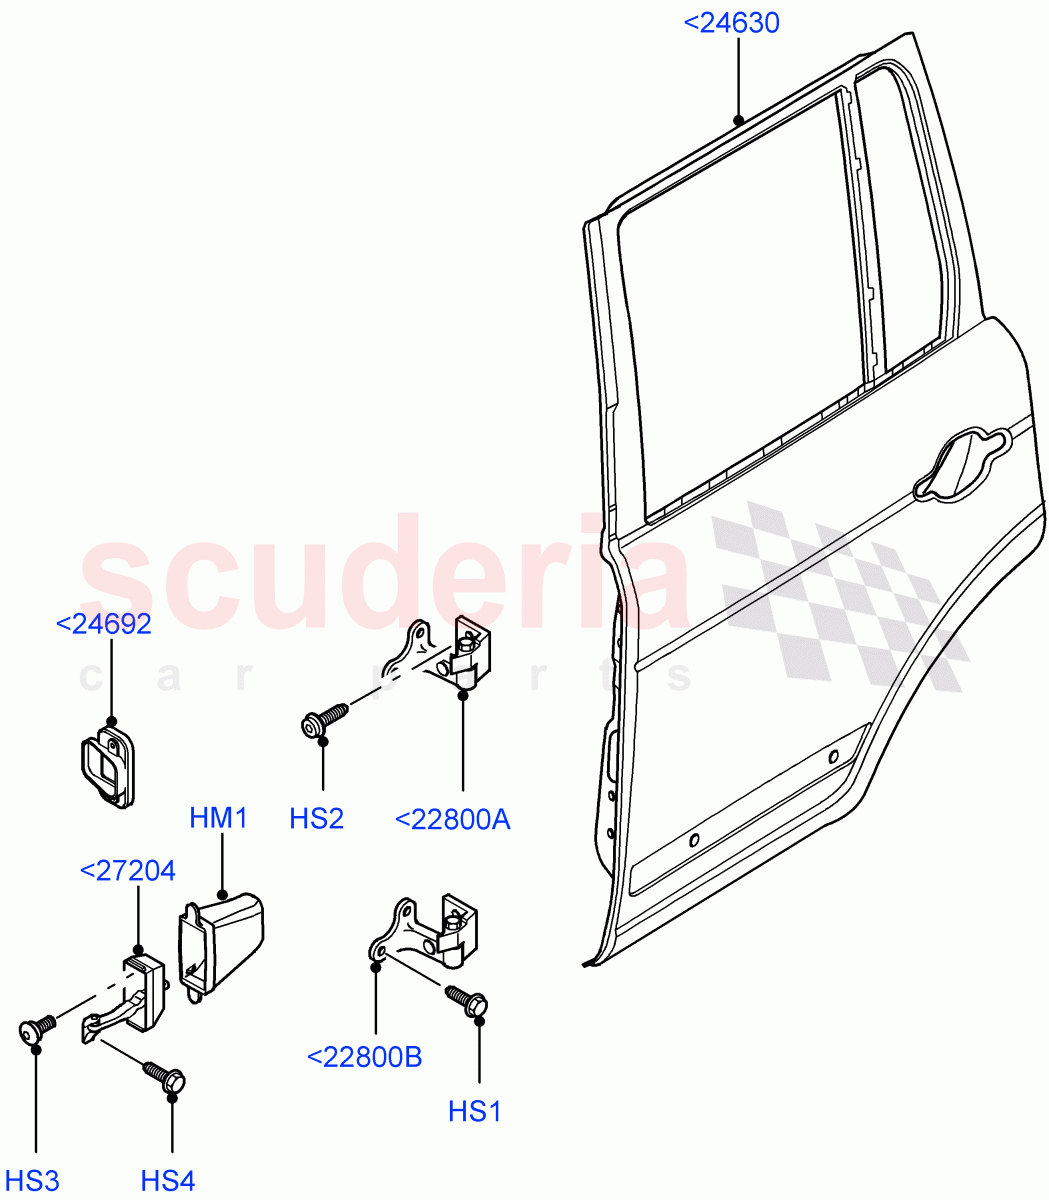 Rear Doors, Hinges & Weatherstrips(Door And Fixings)((V)FROMAA000001) of Land Rover Land Rover Range Rover (2010-2012) [4.4 DOHC Diesel V8 DITC]